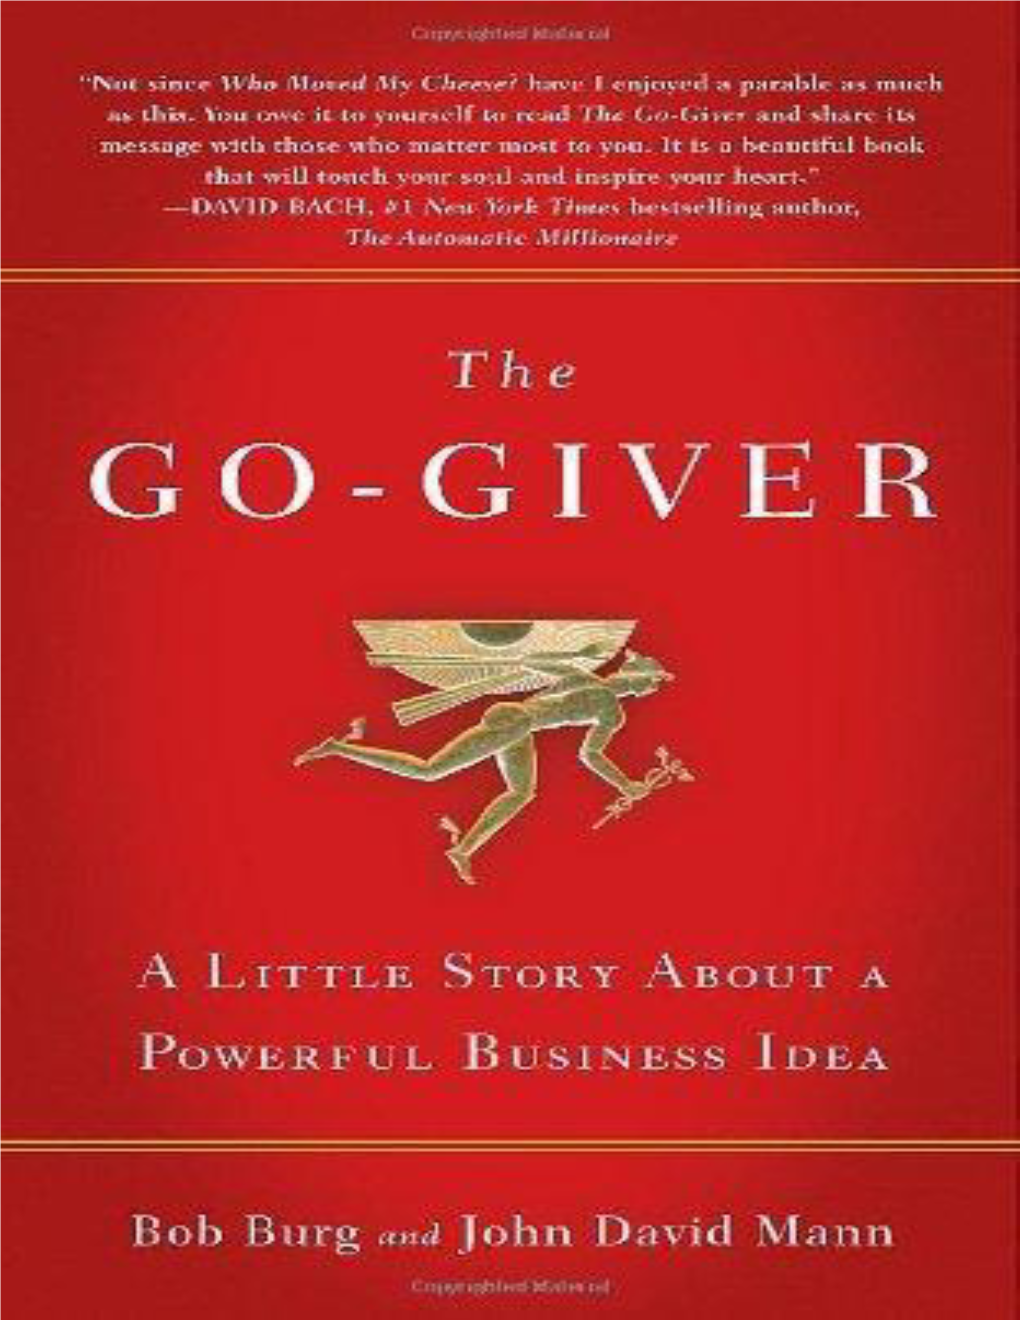 The Go-Giver: a Little Story About a Powerful Business Idea